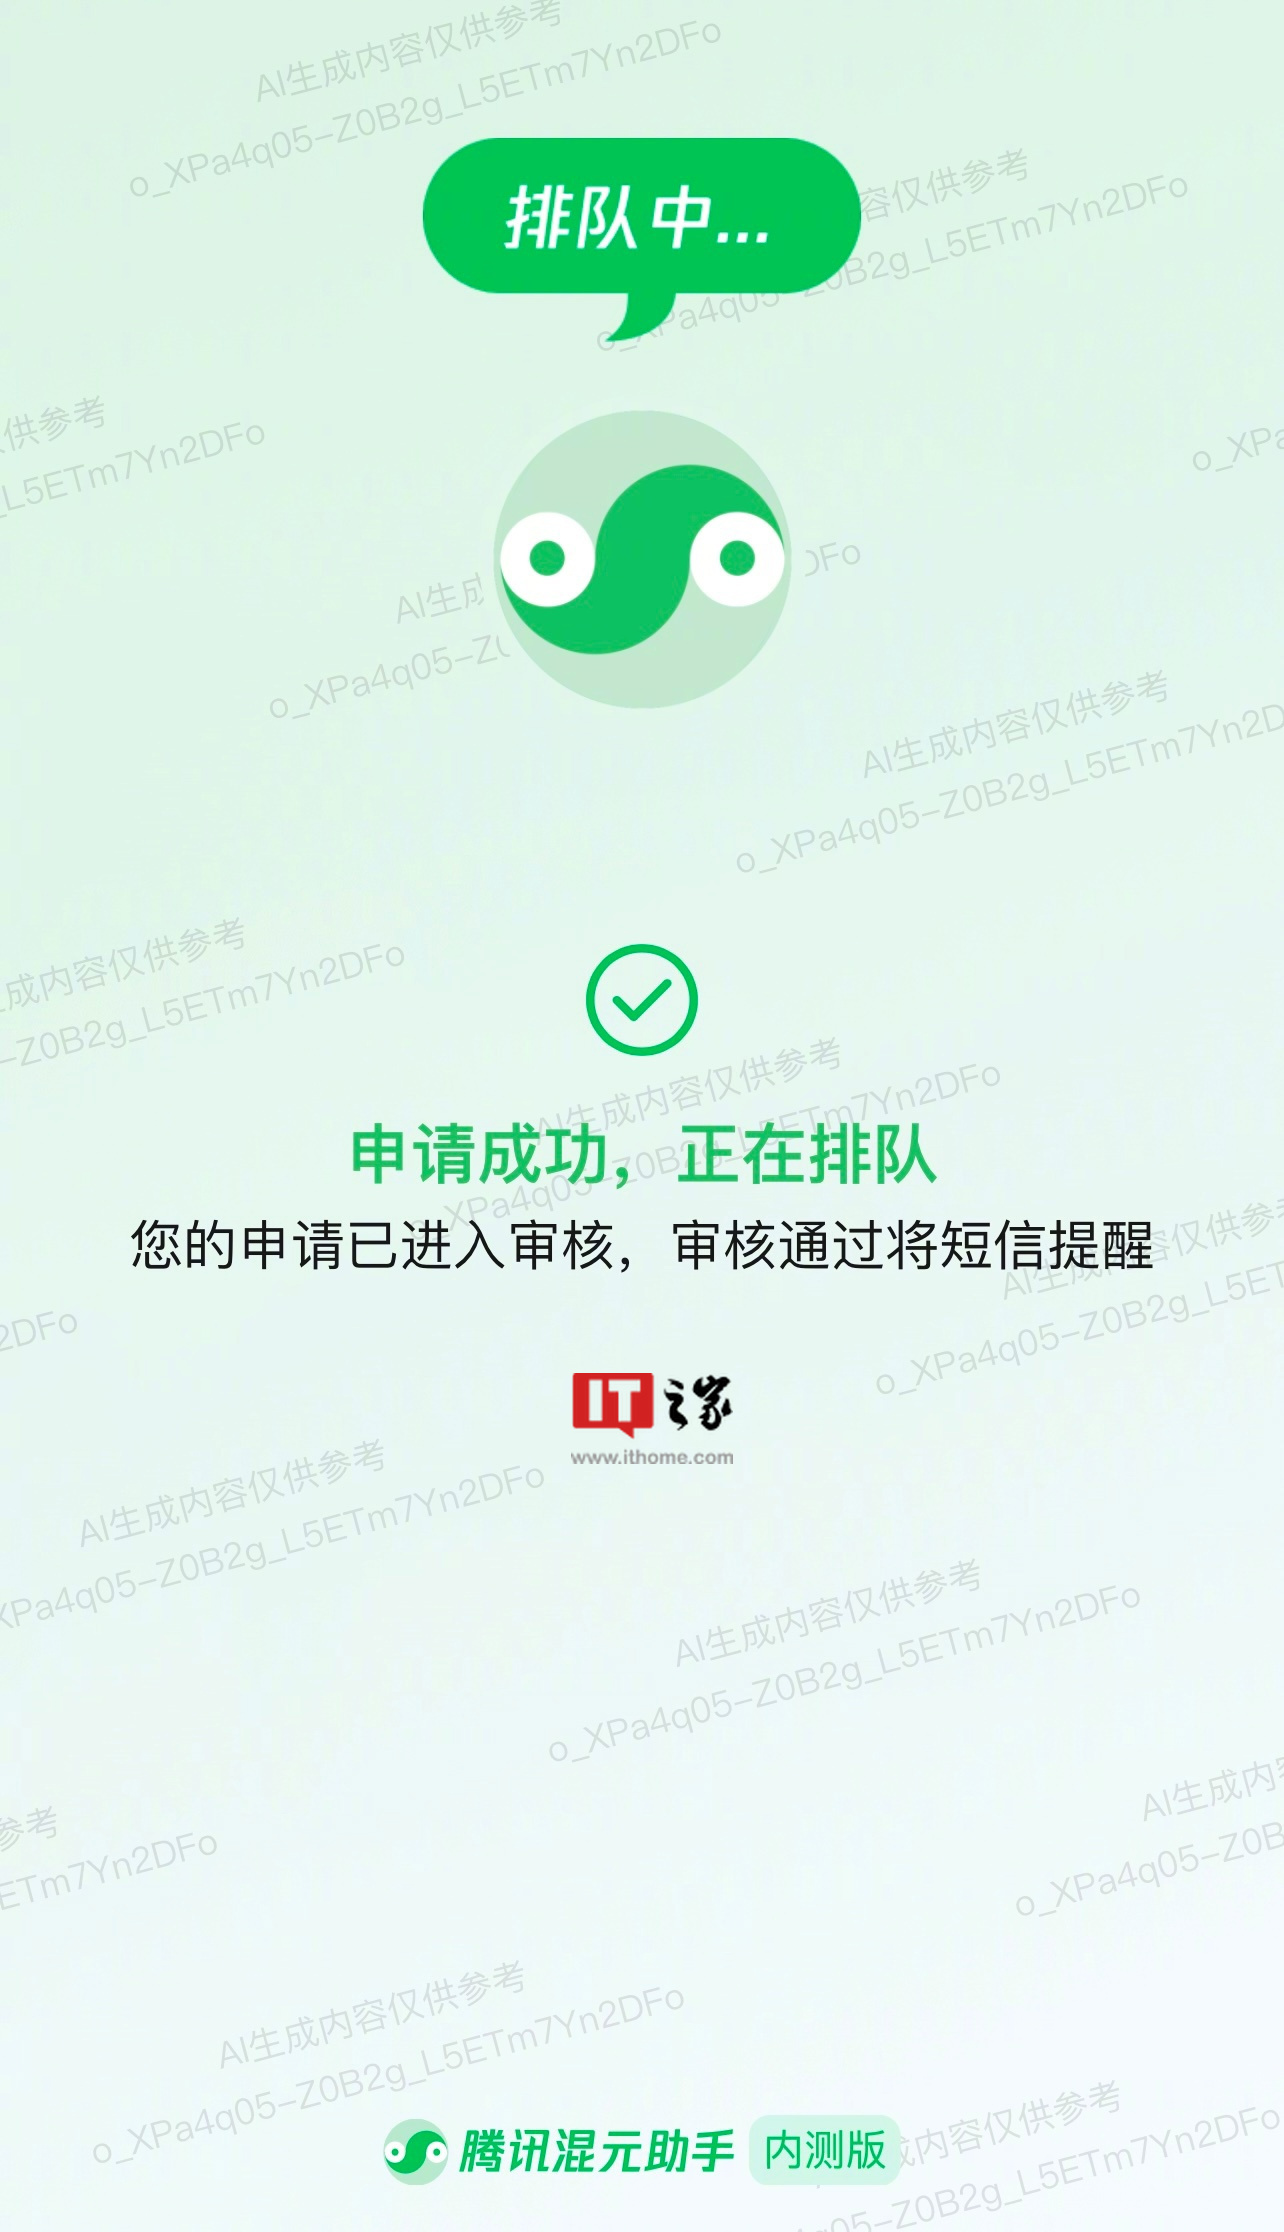 Tencent Hunyuan Assistant WeChat applet is open for internal testing, and you can now apply for queuing experience